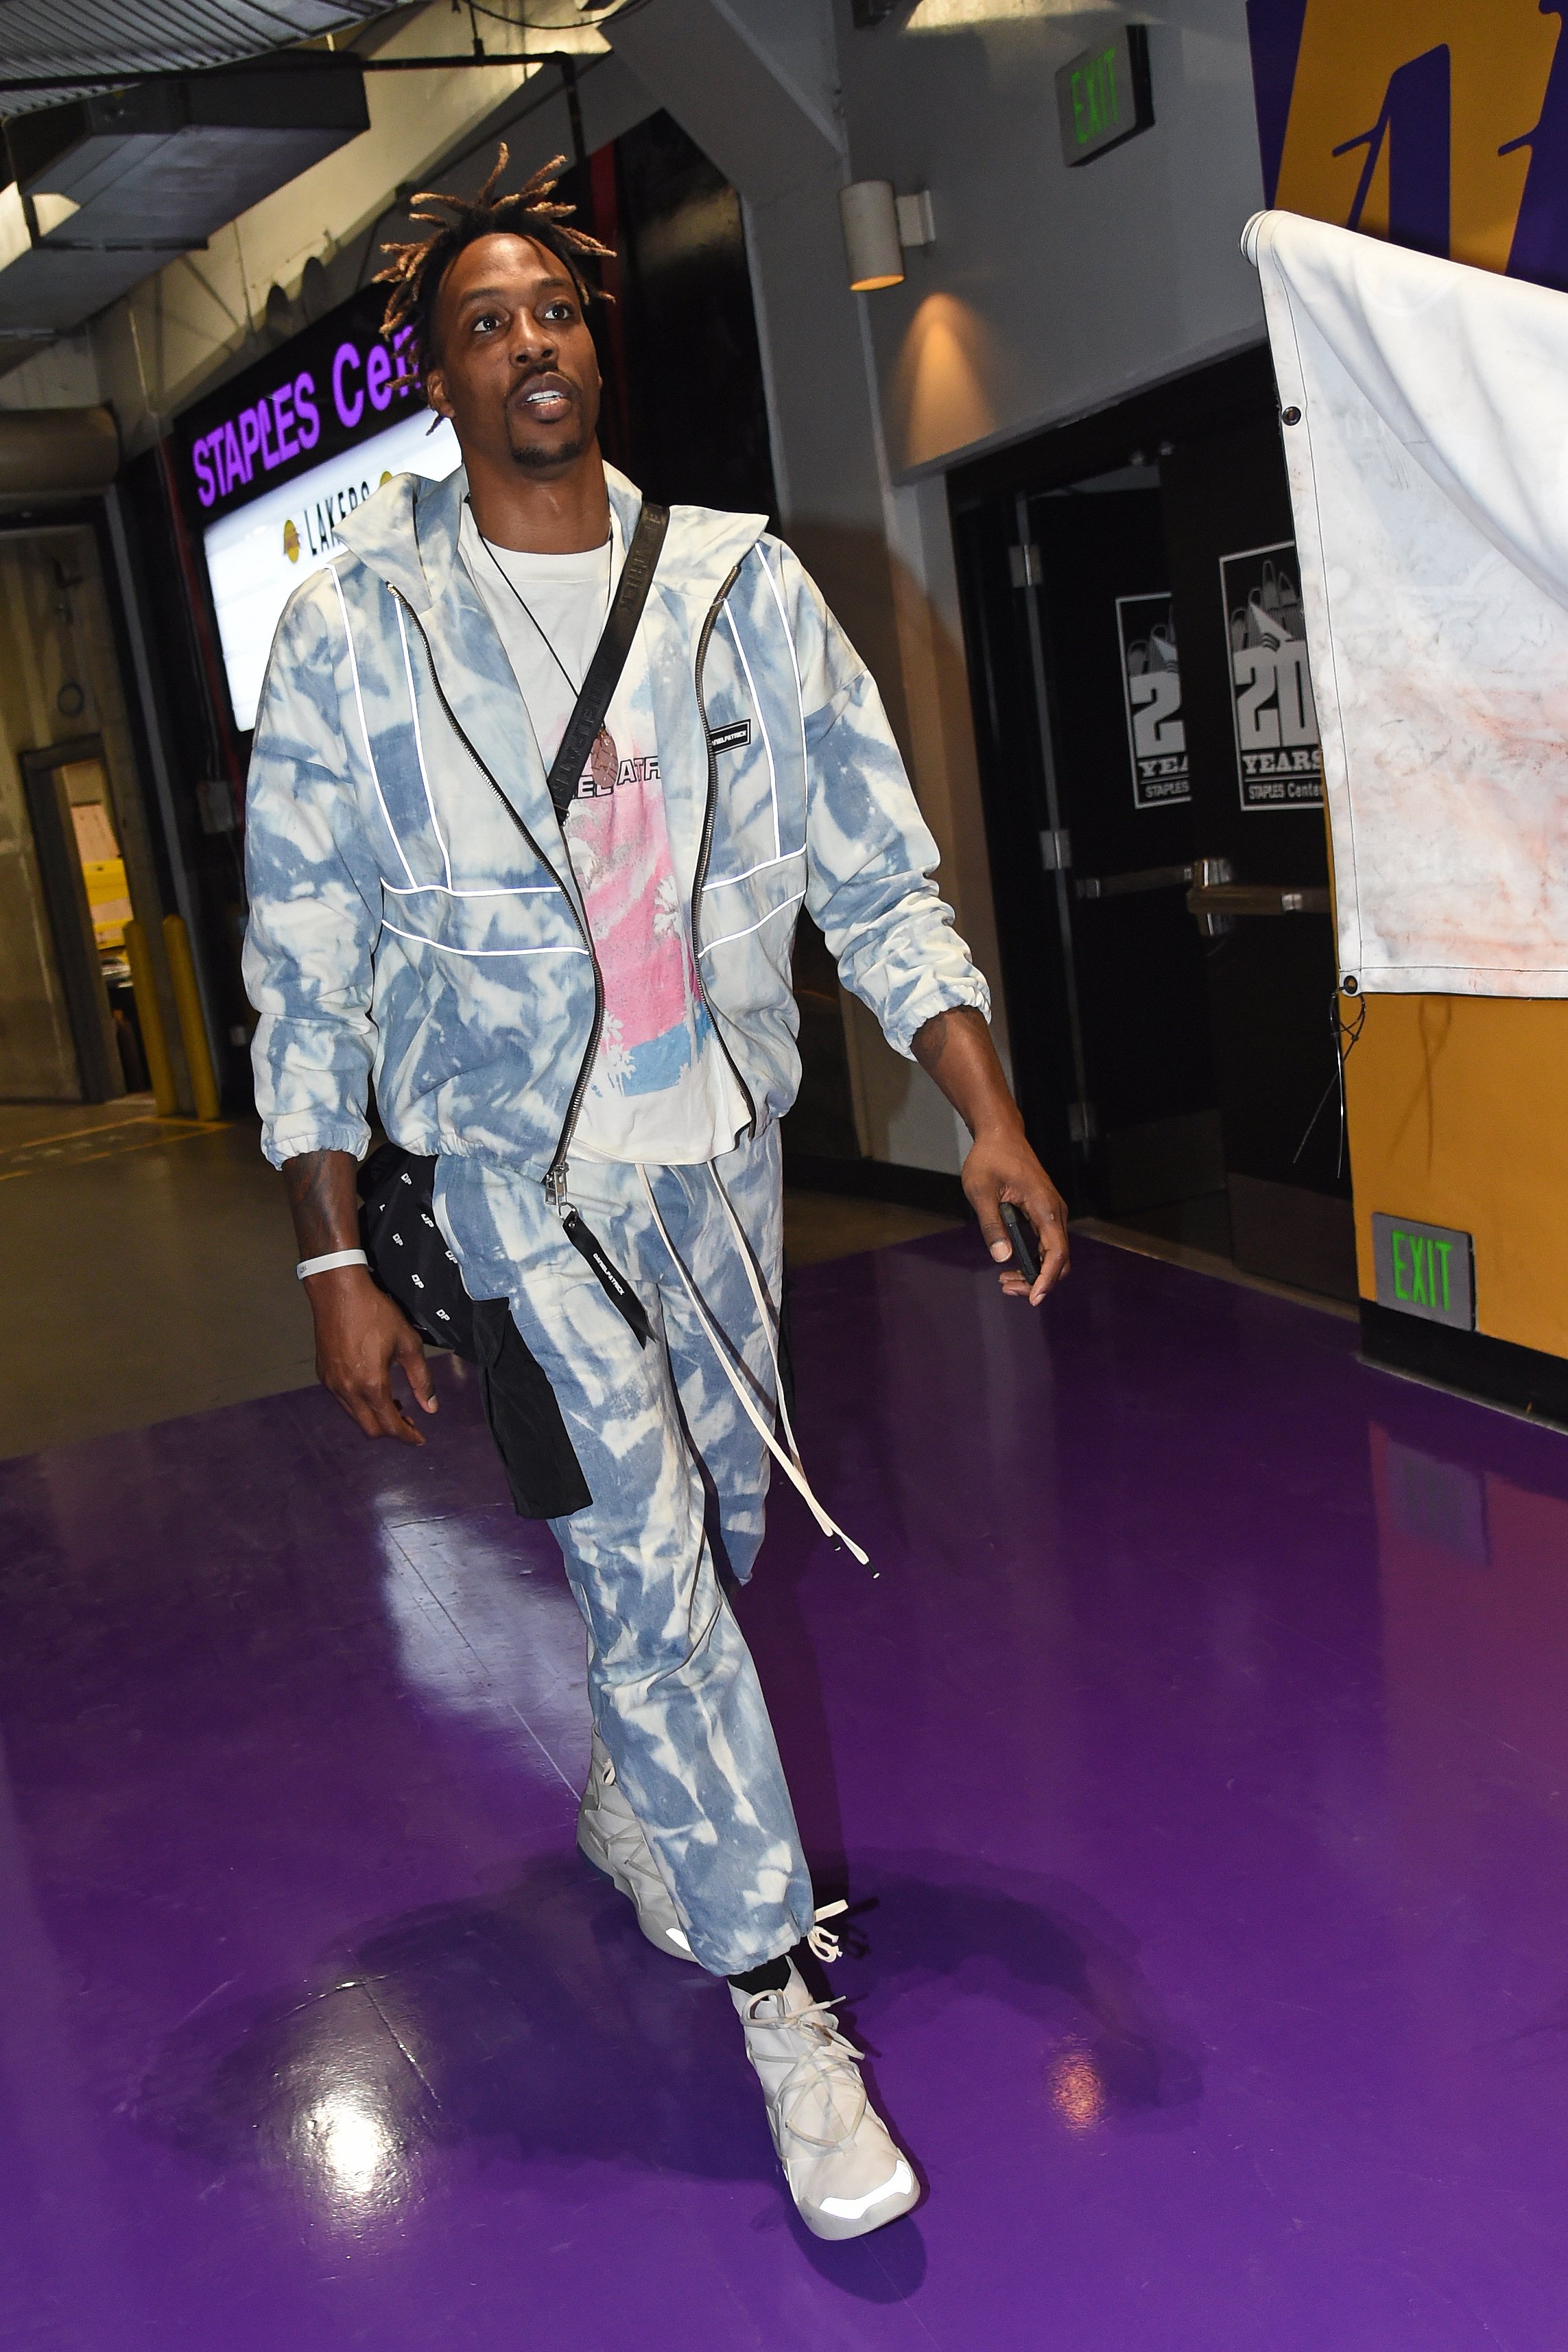 Dwight Howard of the Los Angeles Lakers arrives for a game on February 21, 2020 | Photo: Getty Images